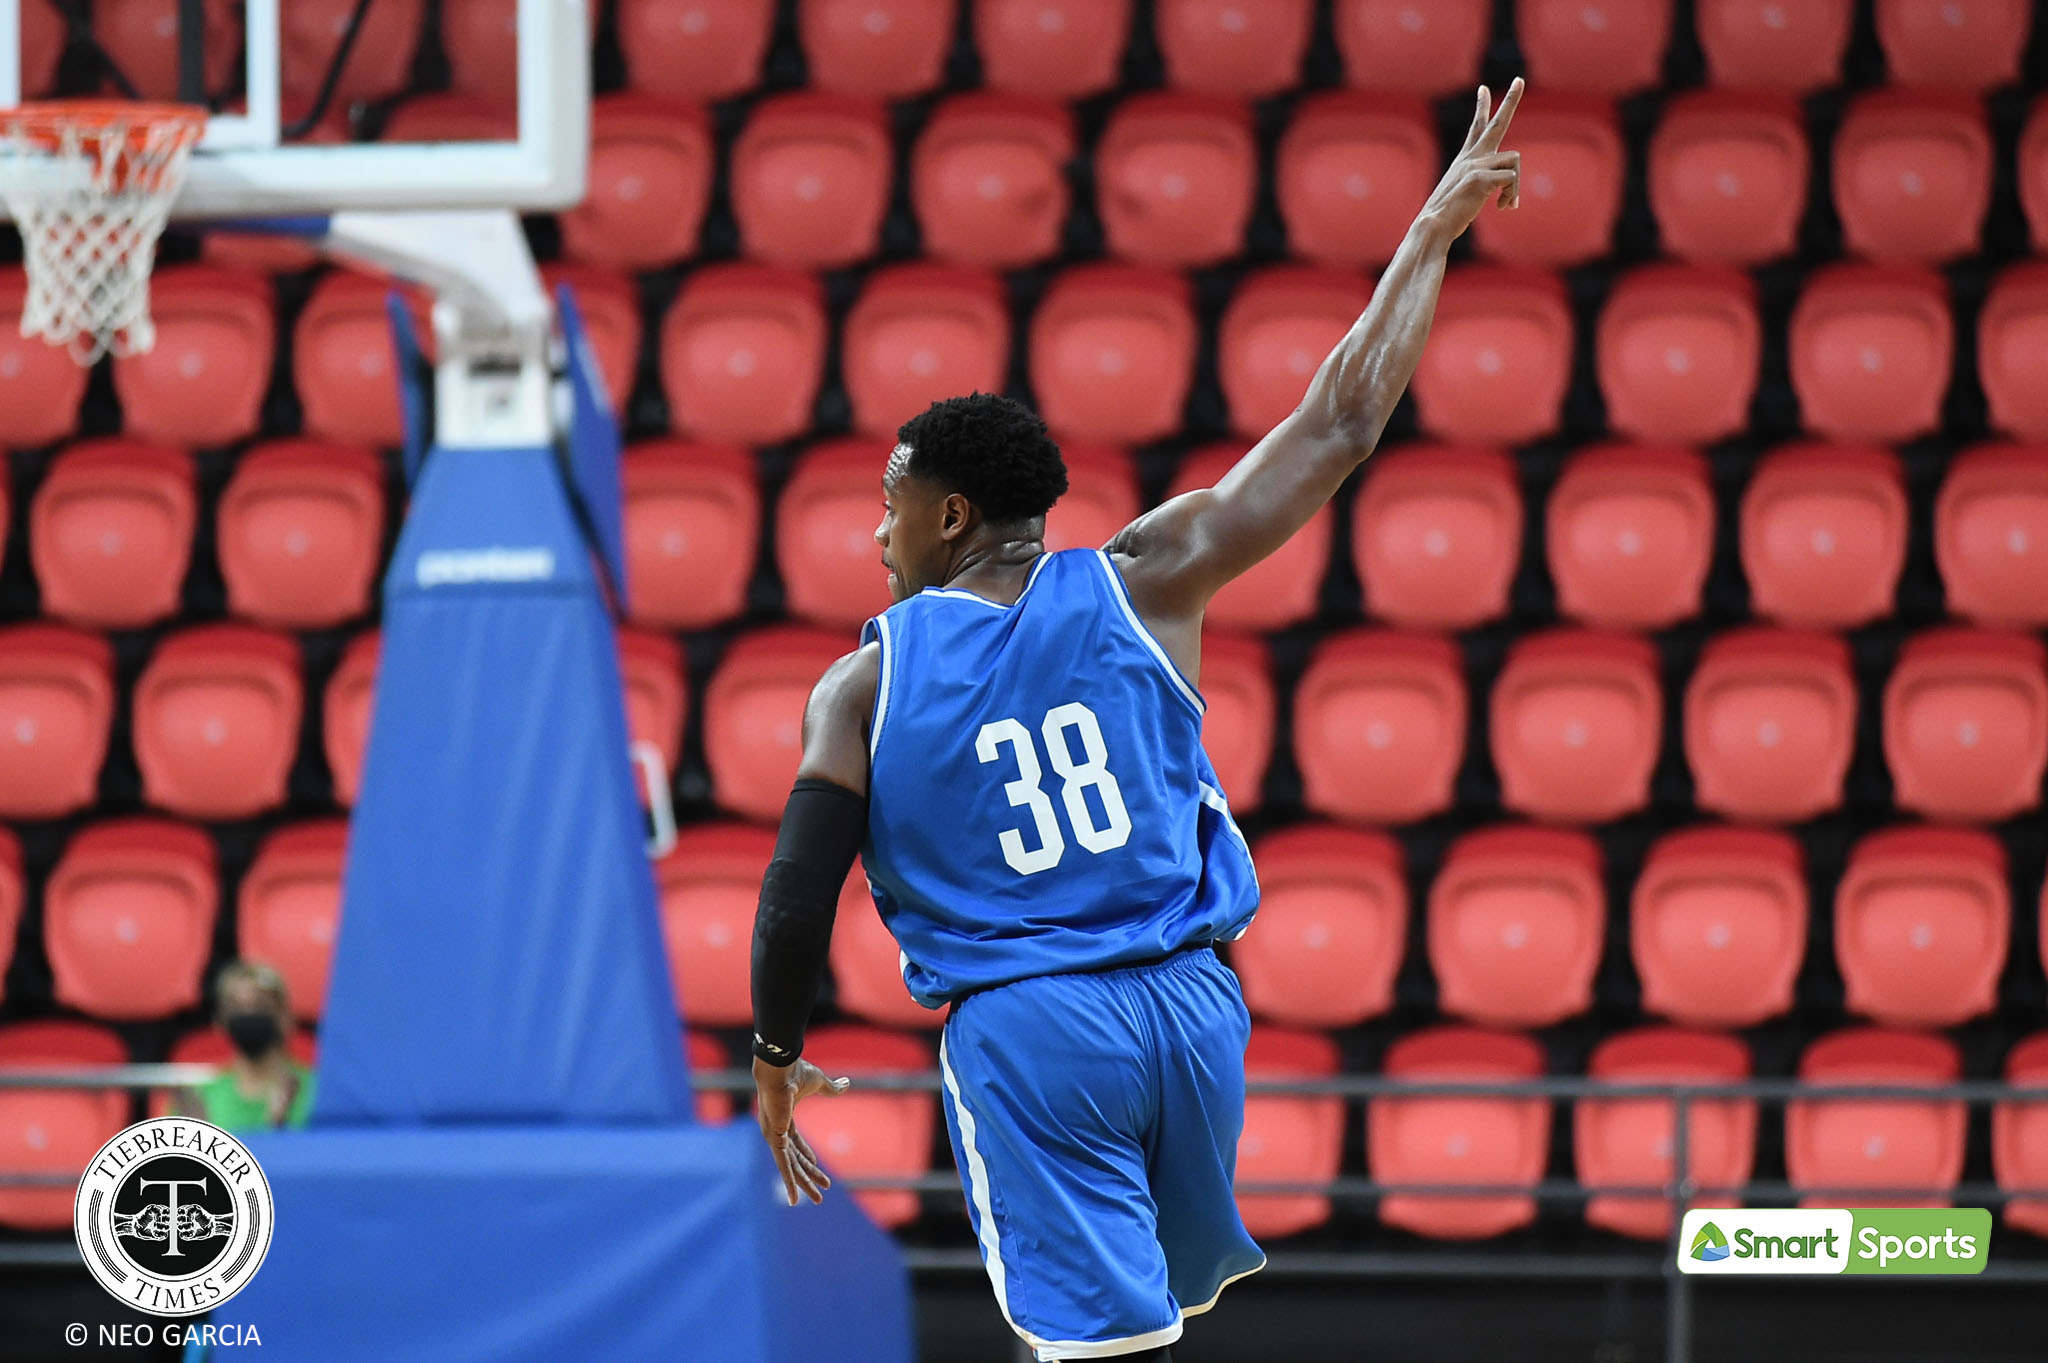 Brownlee says Gilas up to task of taking down China in Asian Games semis